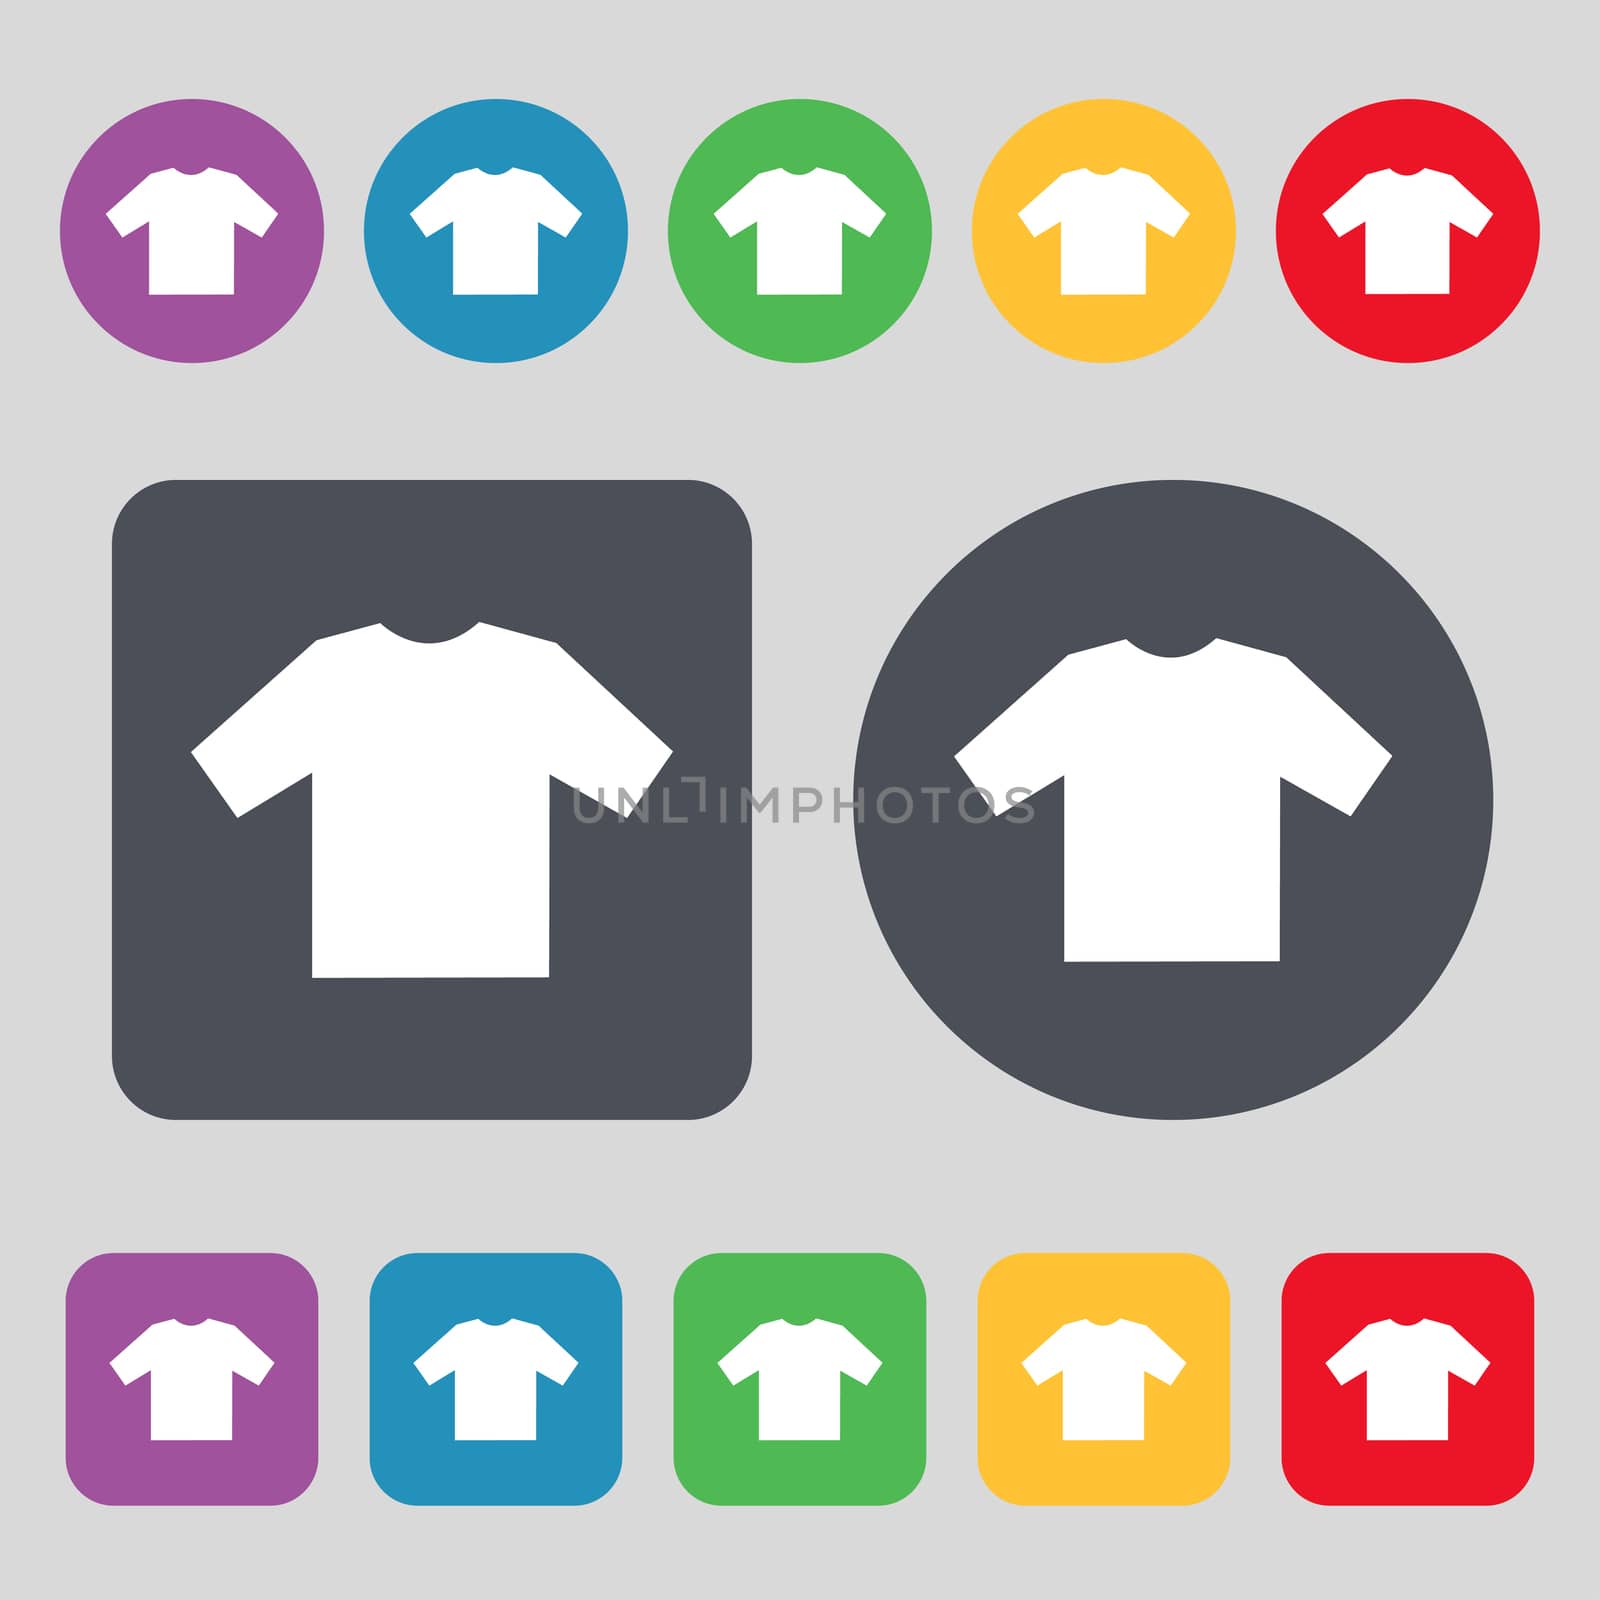 t-shirt icon sign. A set of 12 colored buttons. Flat design.  by serhii_lohvyniuk